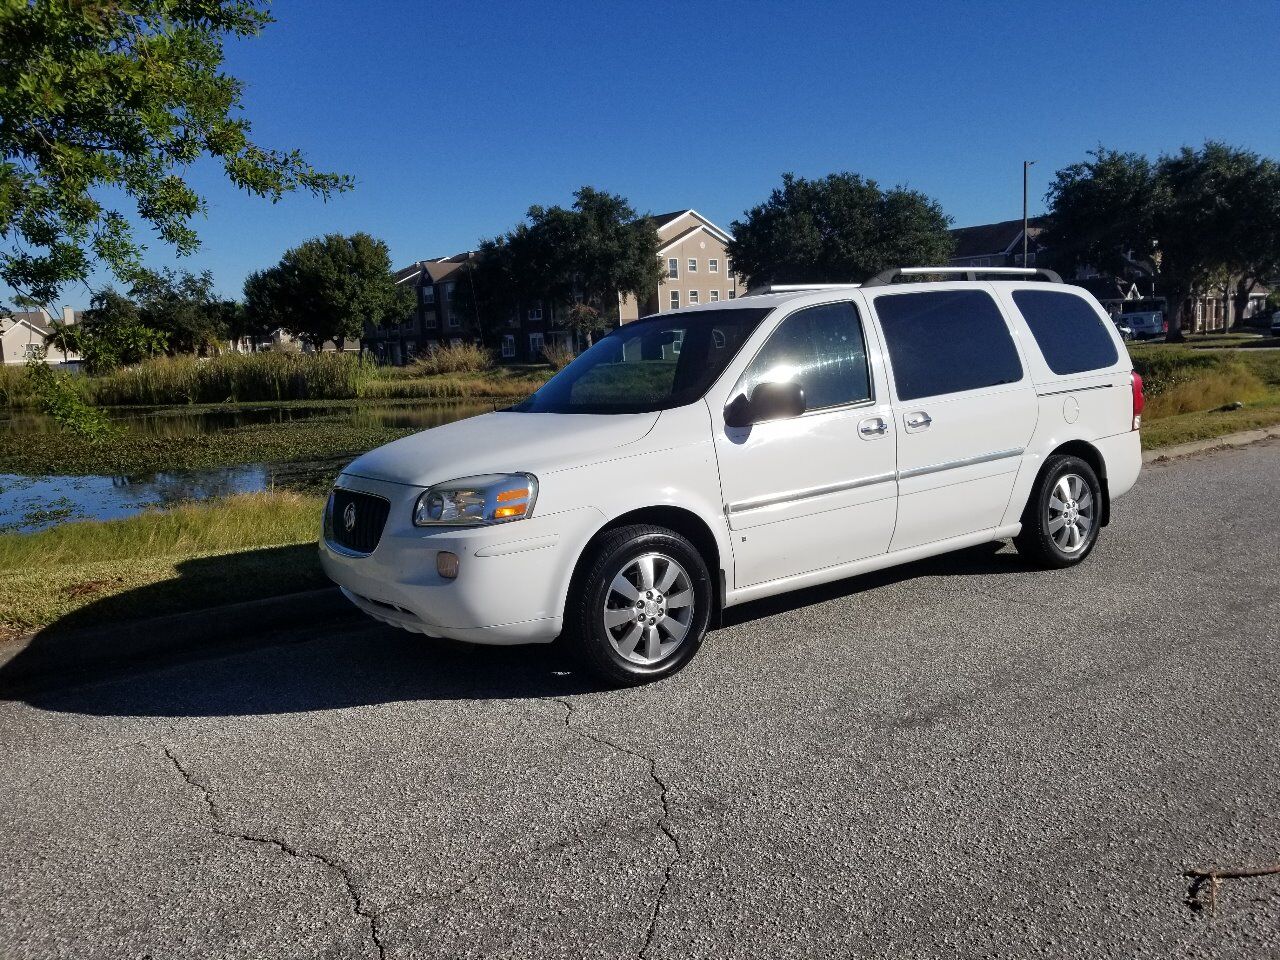 2007 Buick Terraza For Sale In Florida - Carsforsale.com®